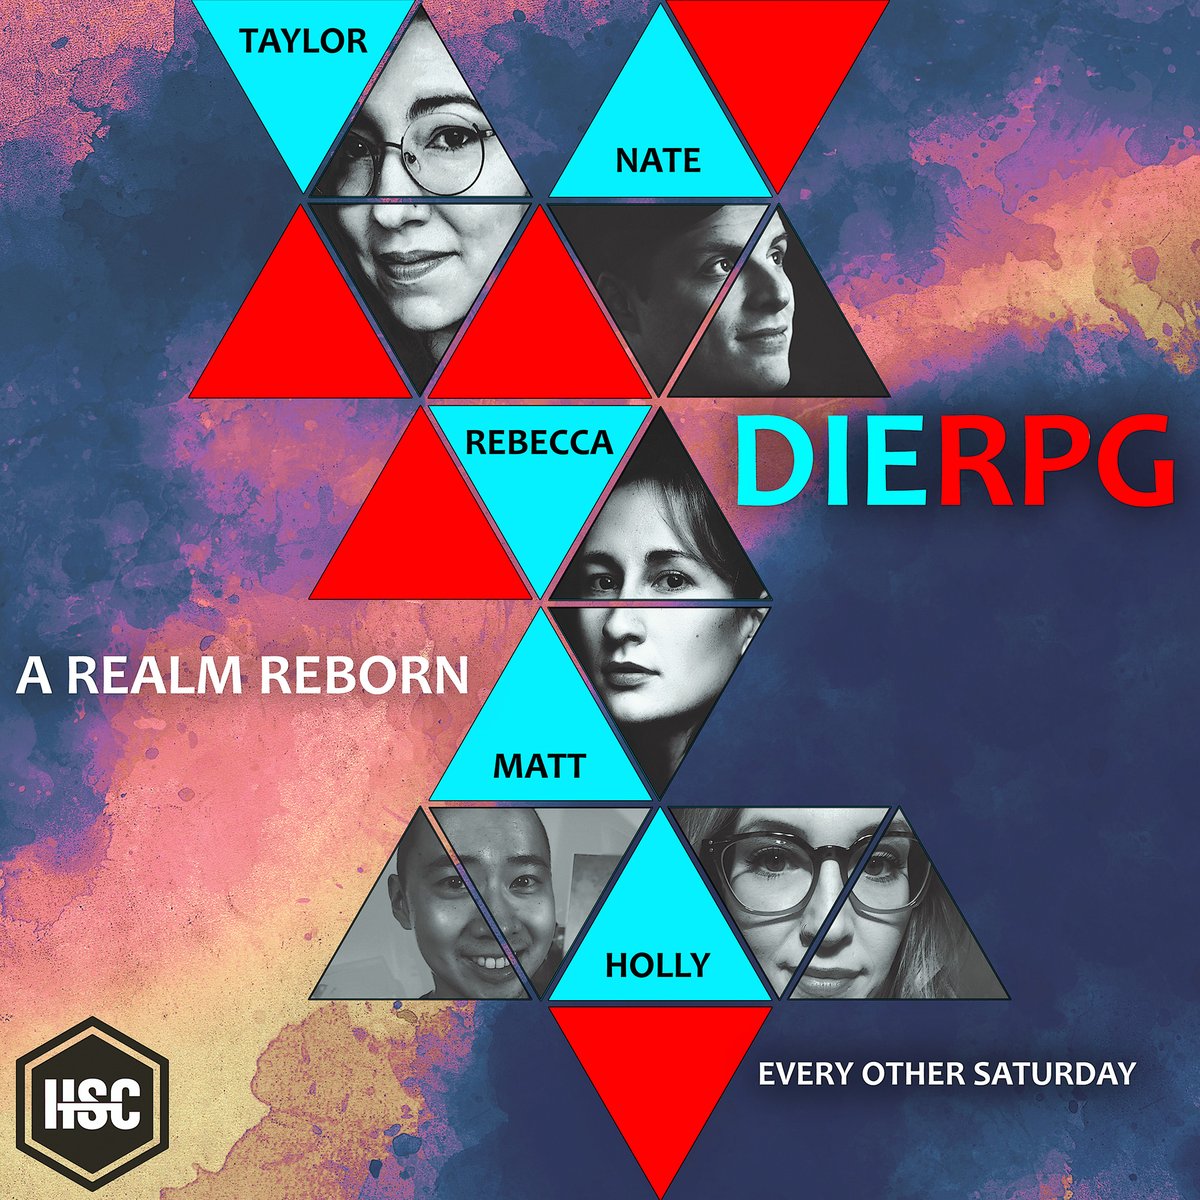 🎲 TONIGHT, 8:30 EST - It's #DIERPG night, 'A Realm Reborn' & our party have a few things to process..

Things are strange & unusual. How do you stop the world from ending? Is this really just a game? Who the HELL is Alice? Questions that deserve answers, ones that hopefully can.